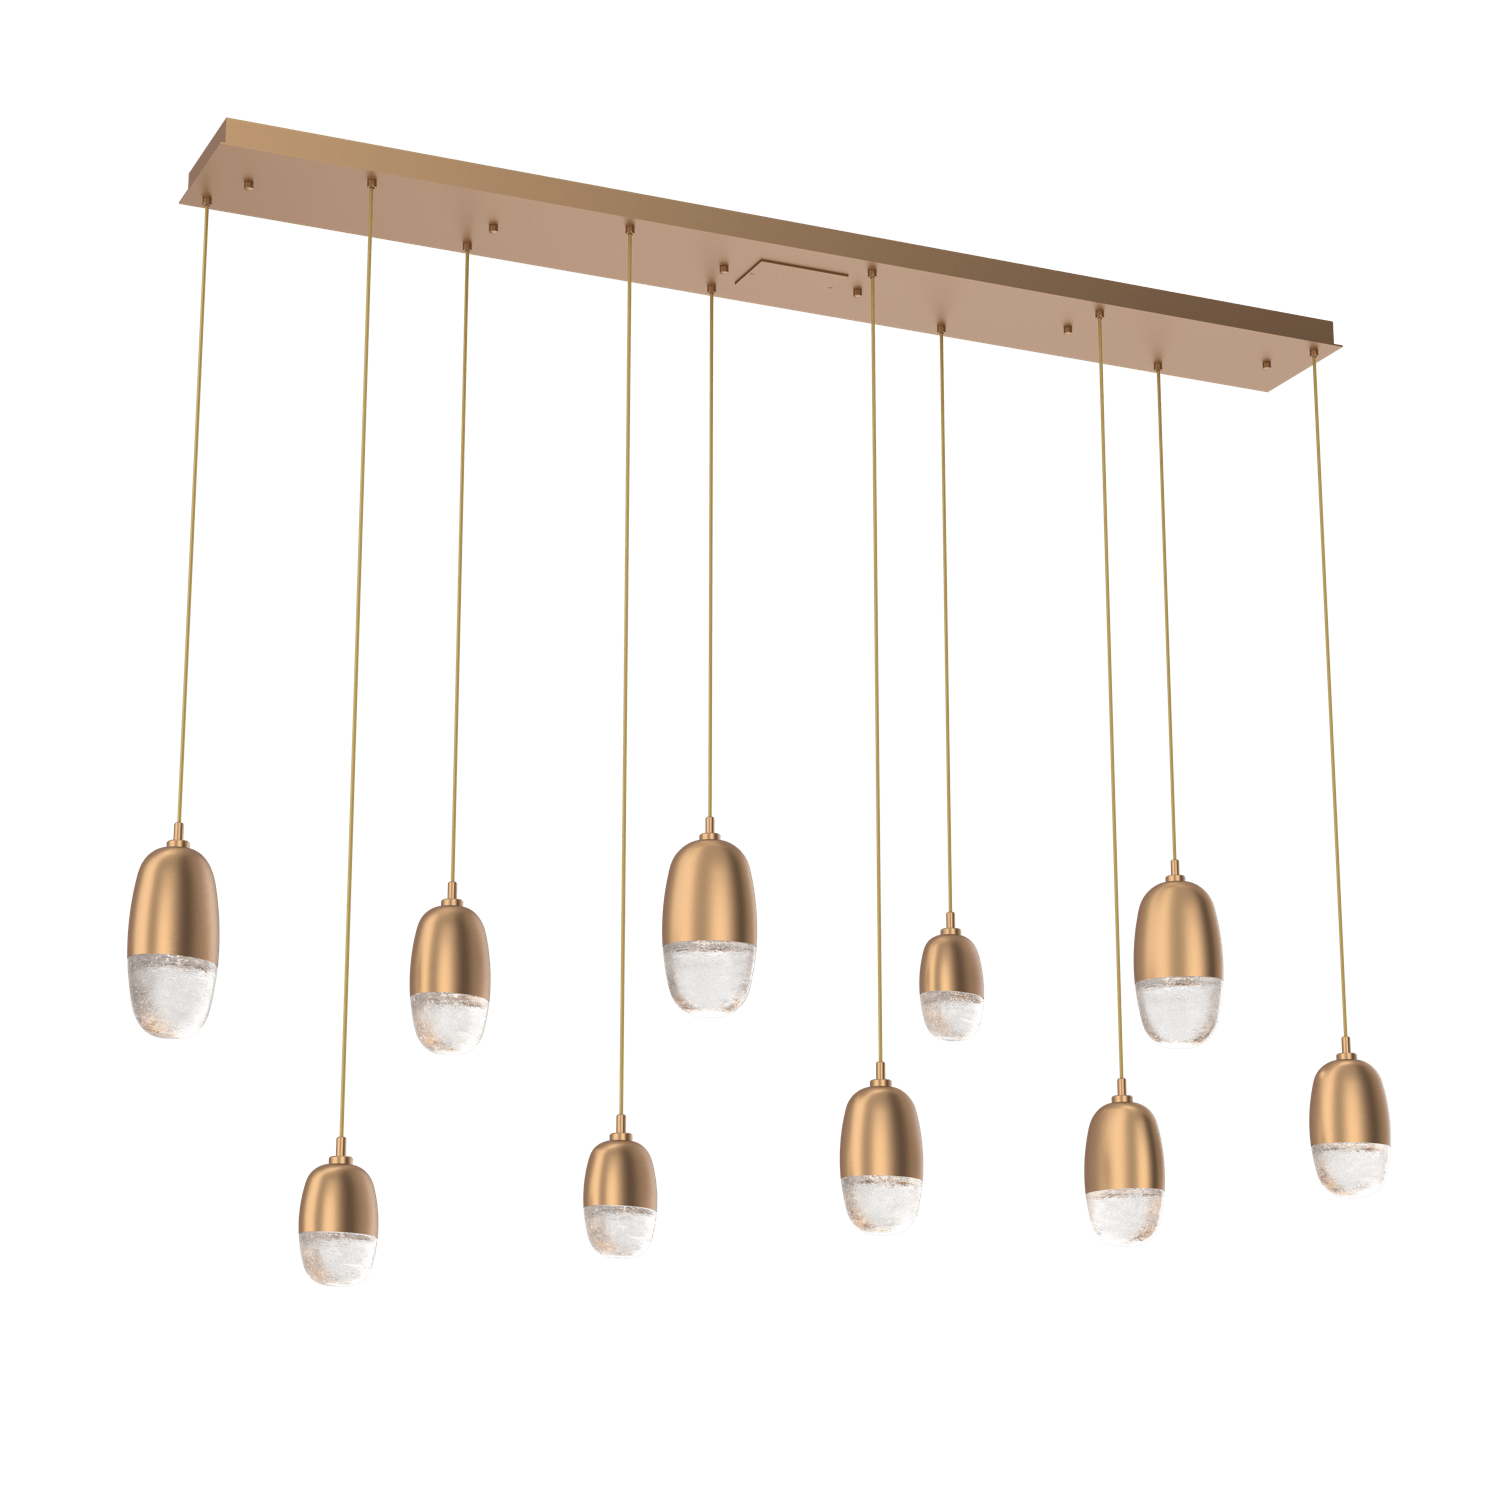 PLB0079-09-NB-Hammerton-Studio-Pebble-9-light-linear-pendant-chandelier-with-novel-brass-finish-and-clear-cast-glass-shades-and-LED-lamping